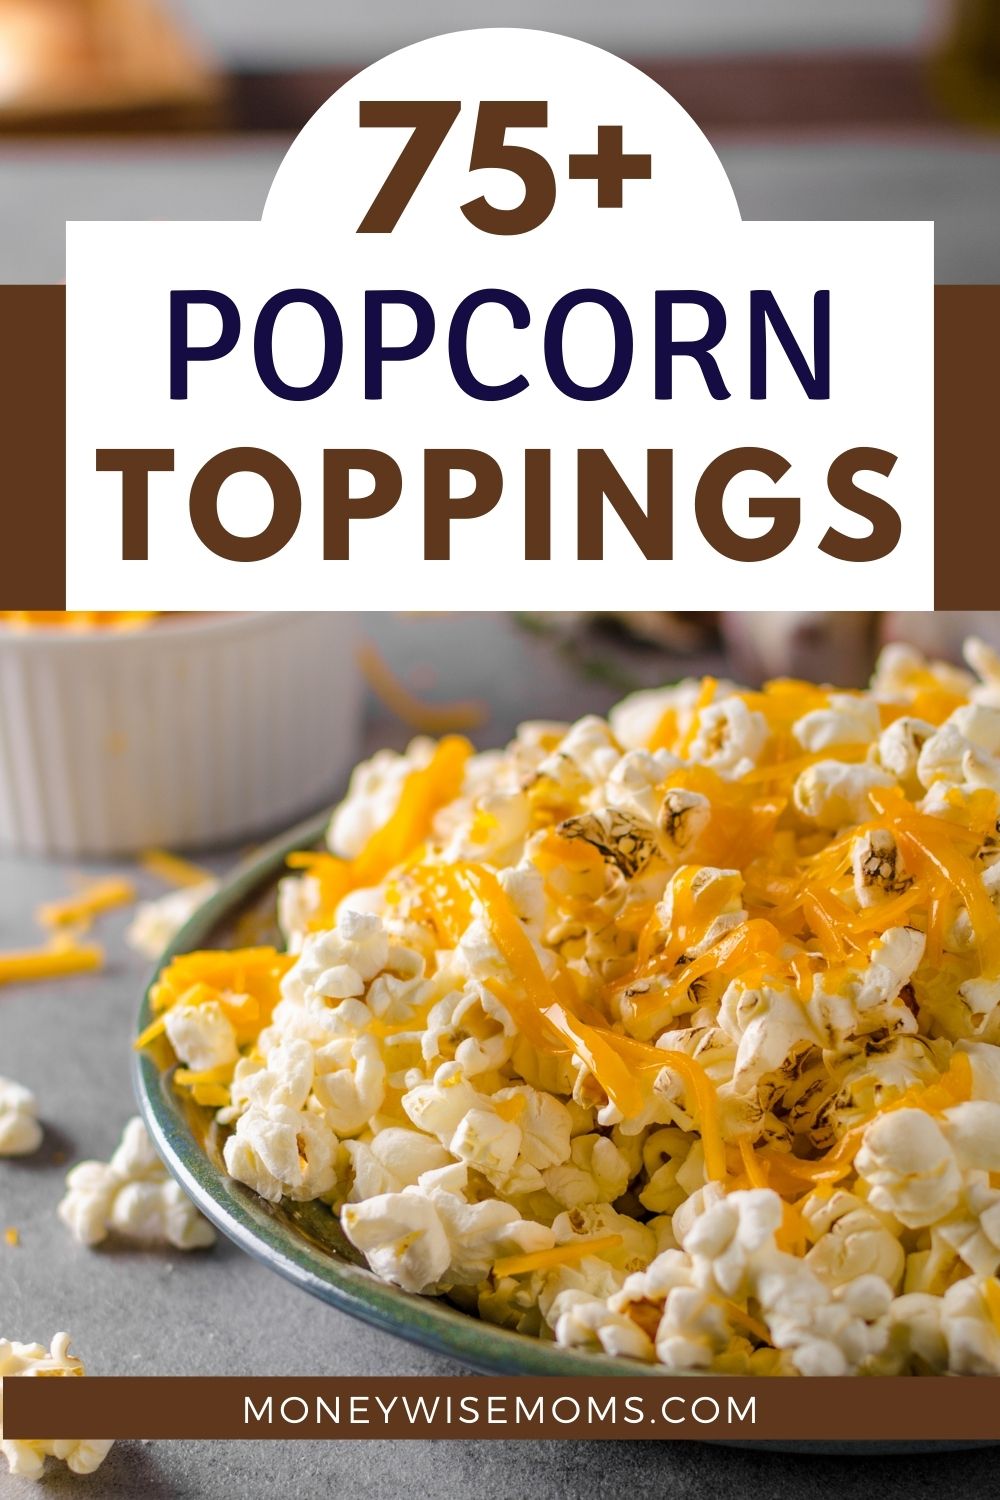 75+ popcorn topping ideas - cheese popcorn in green bowl